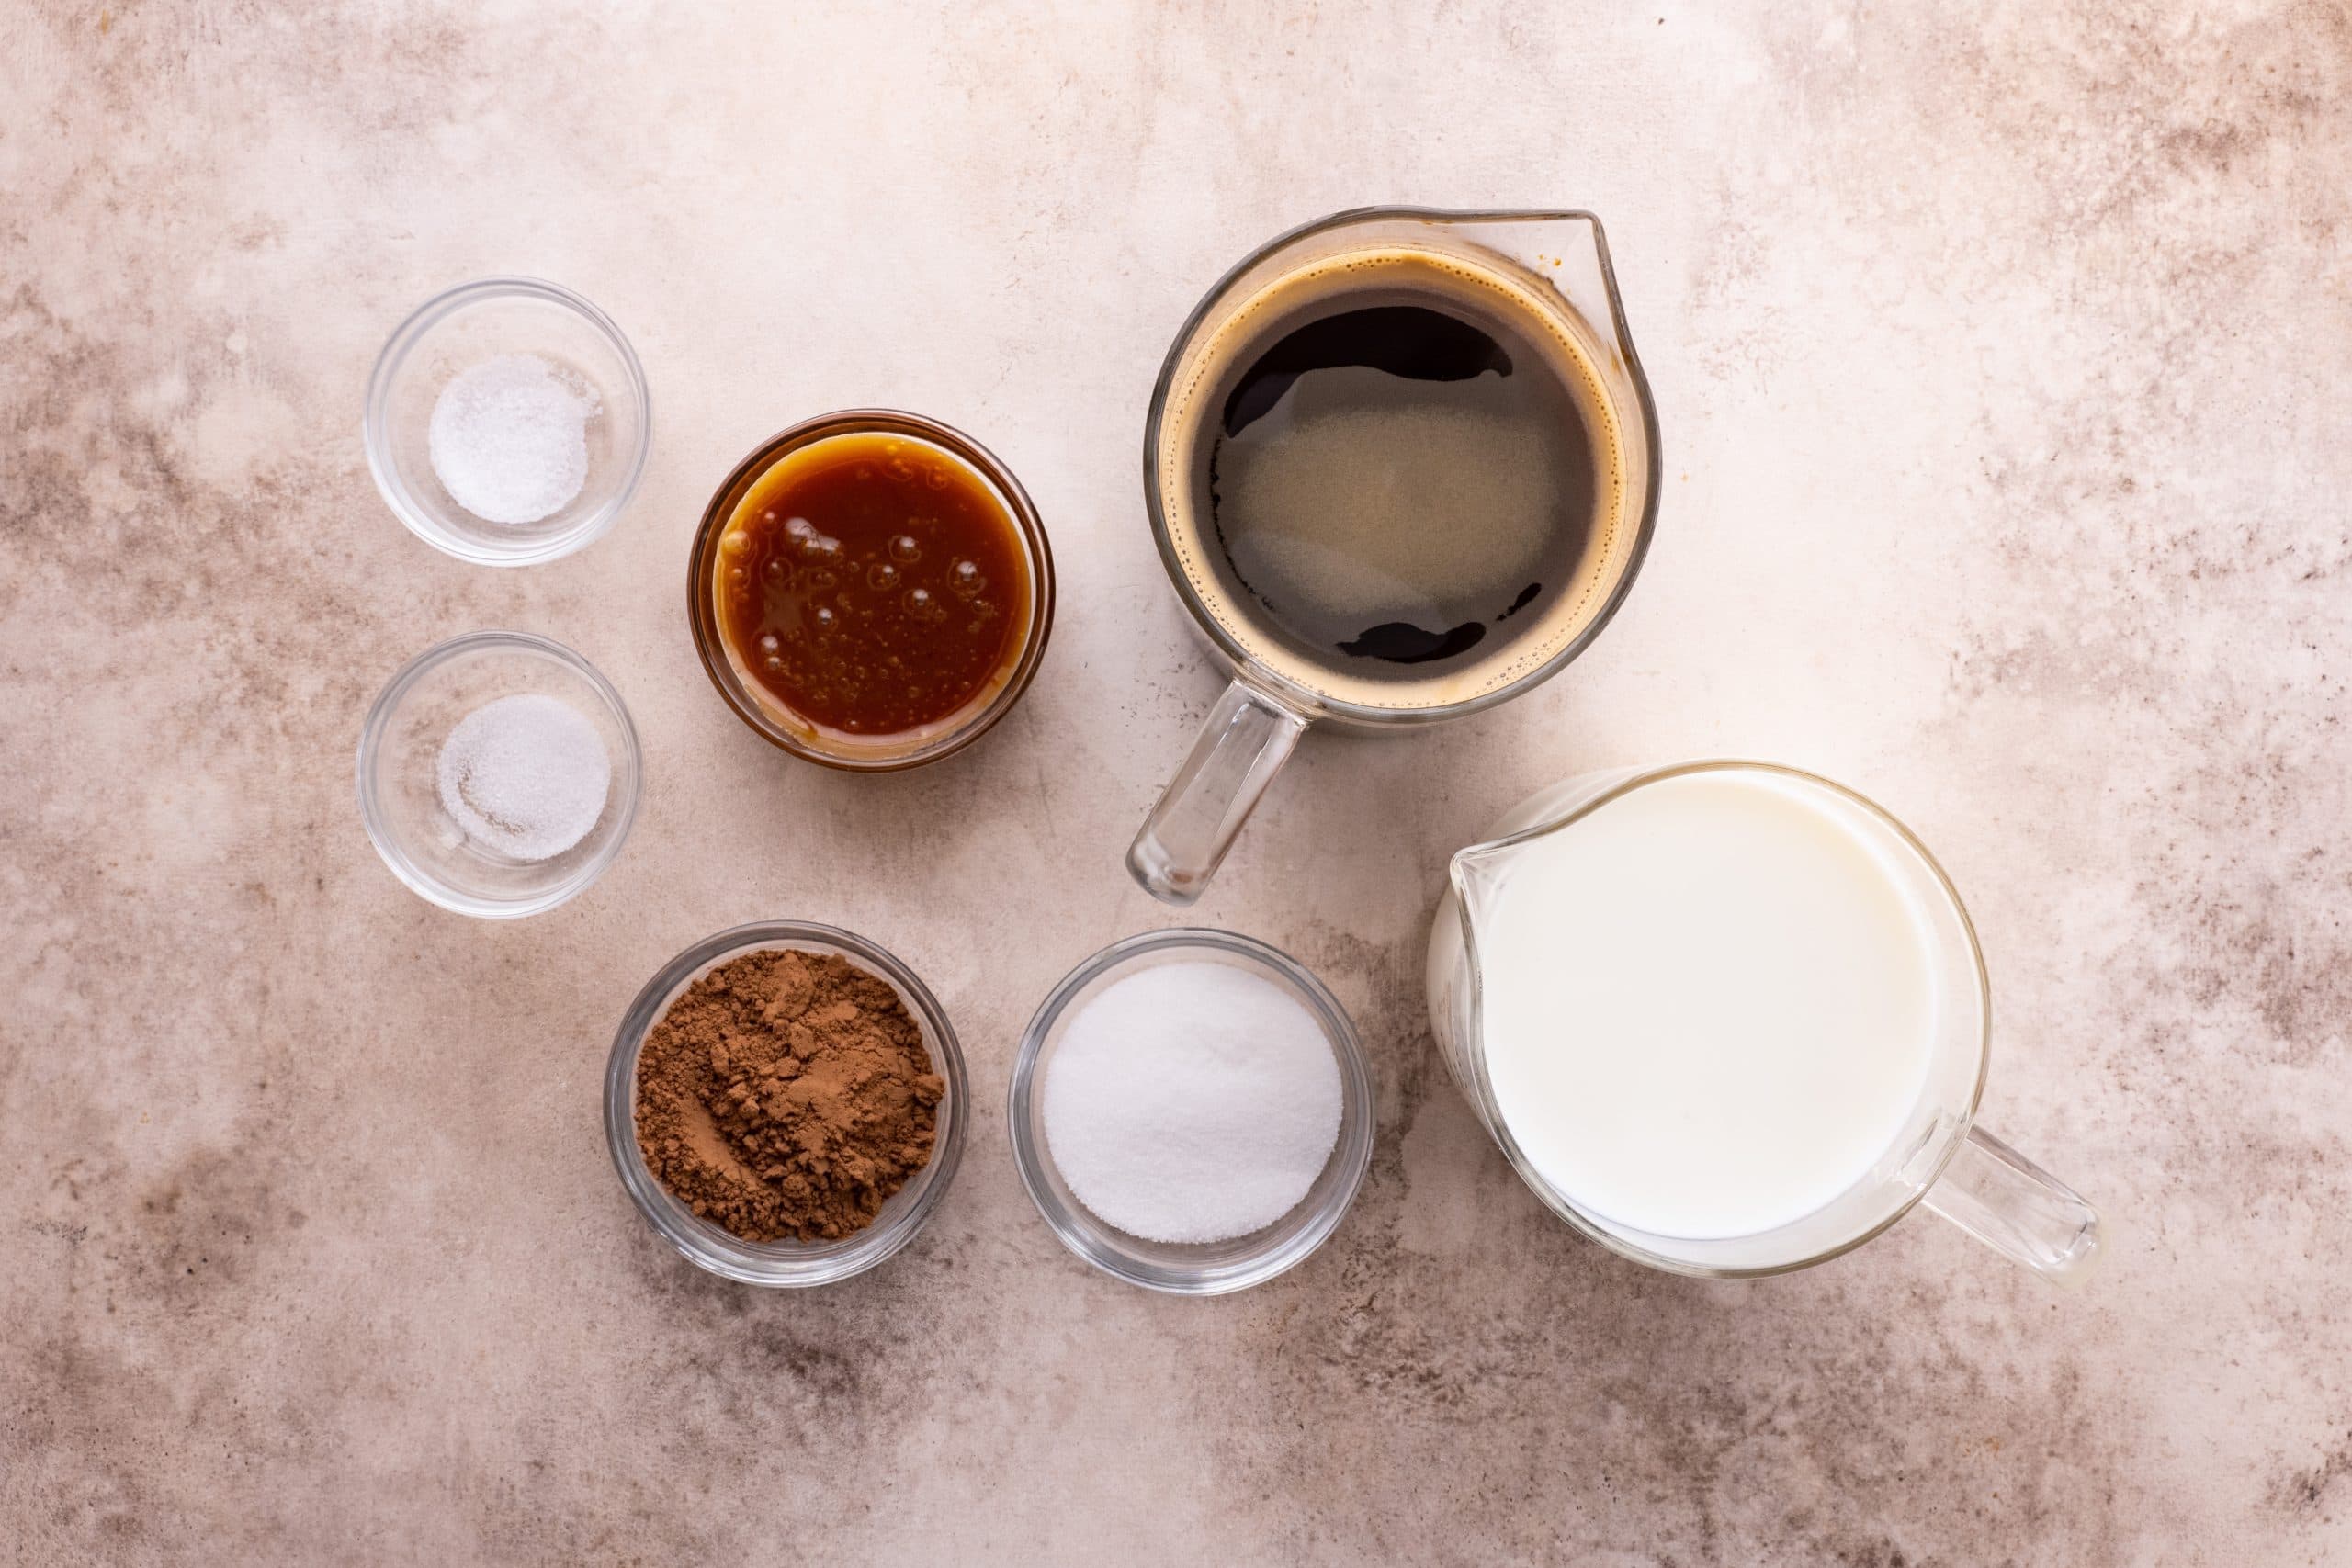 Overhead shot of small bowls and liquid measuring cups holding mocha ingredients